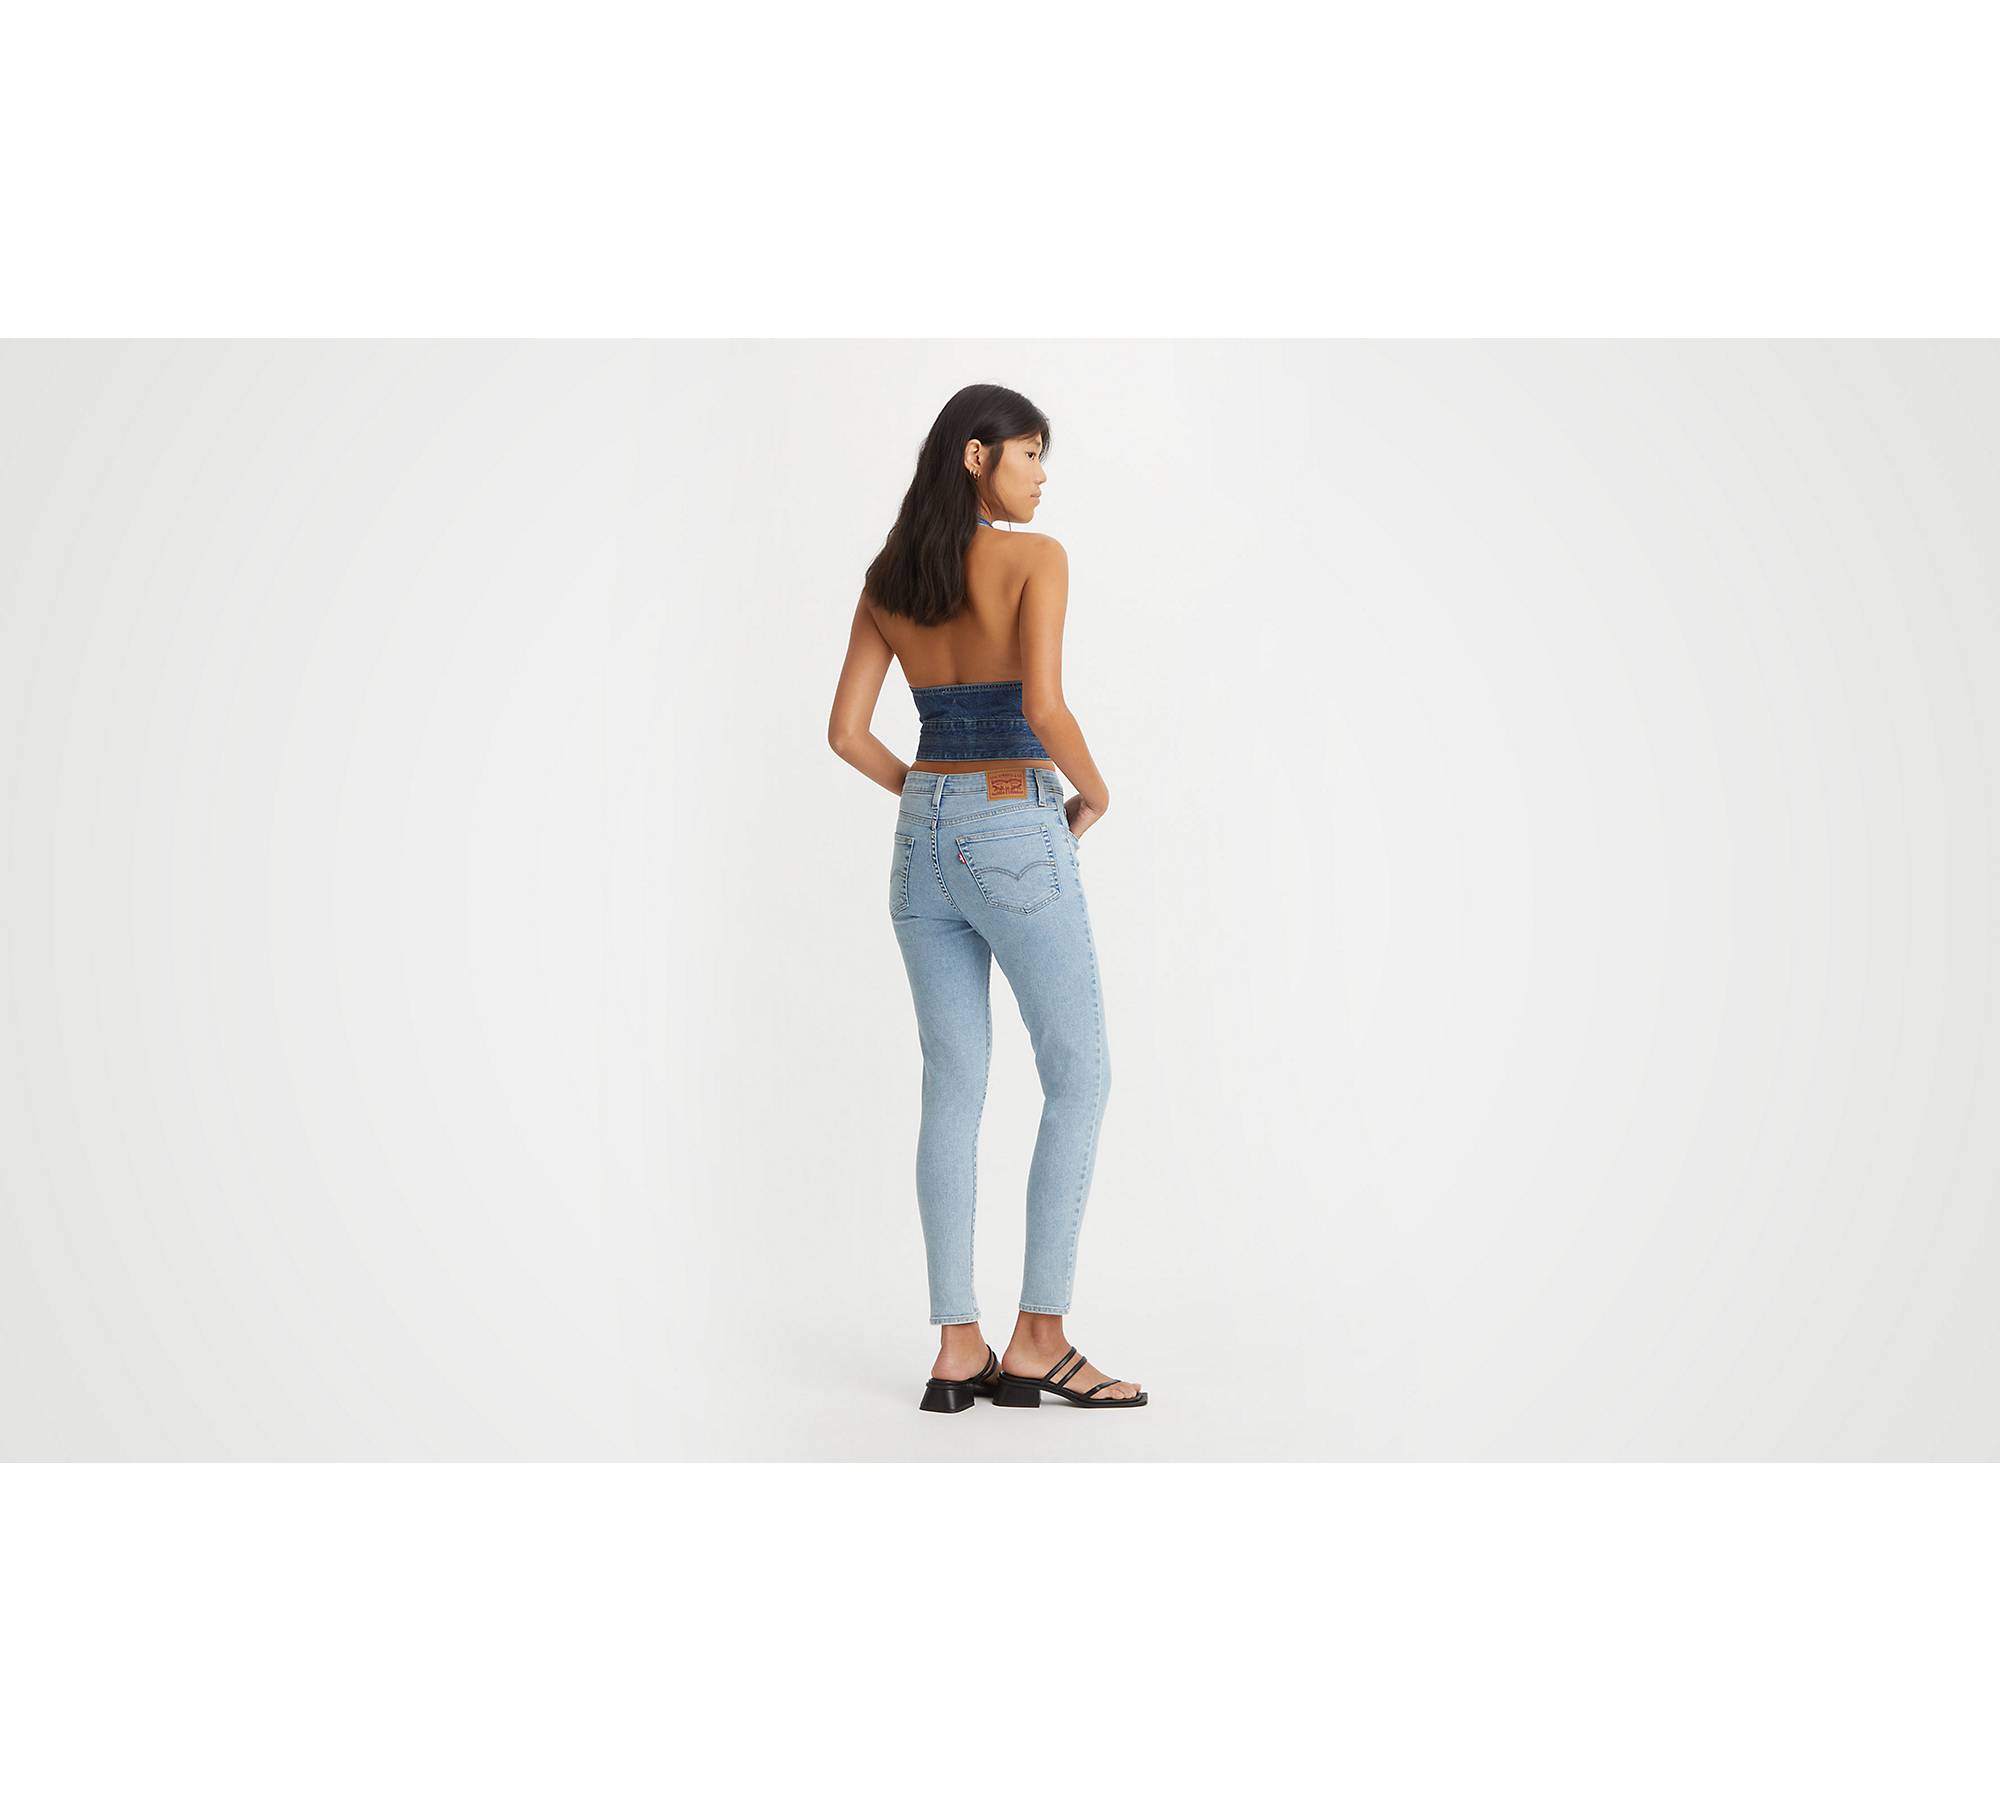 721 Recrafted Women's Jeans - Light Wash